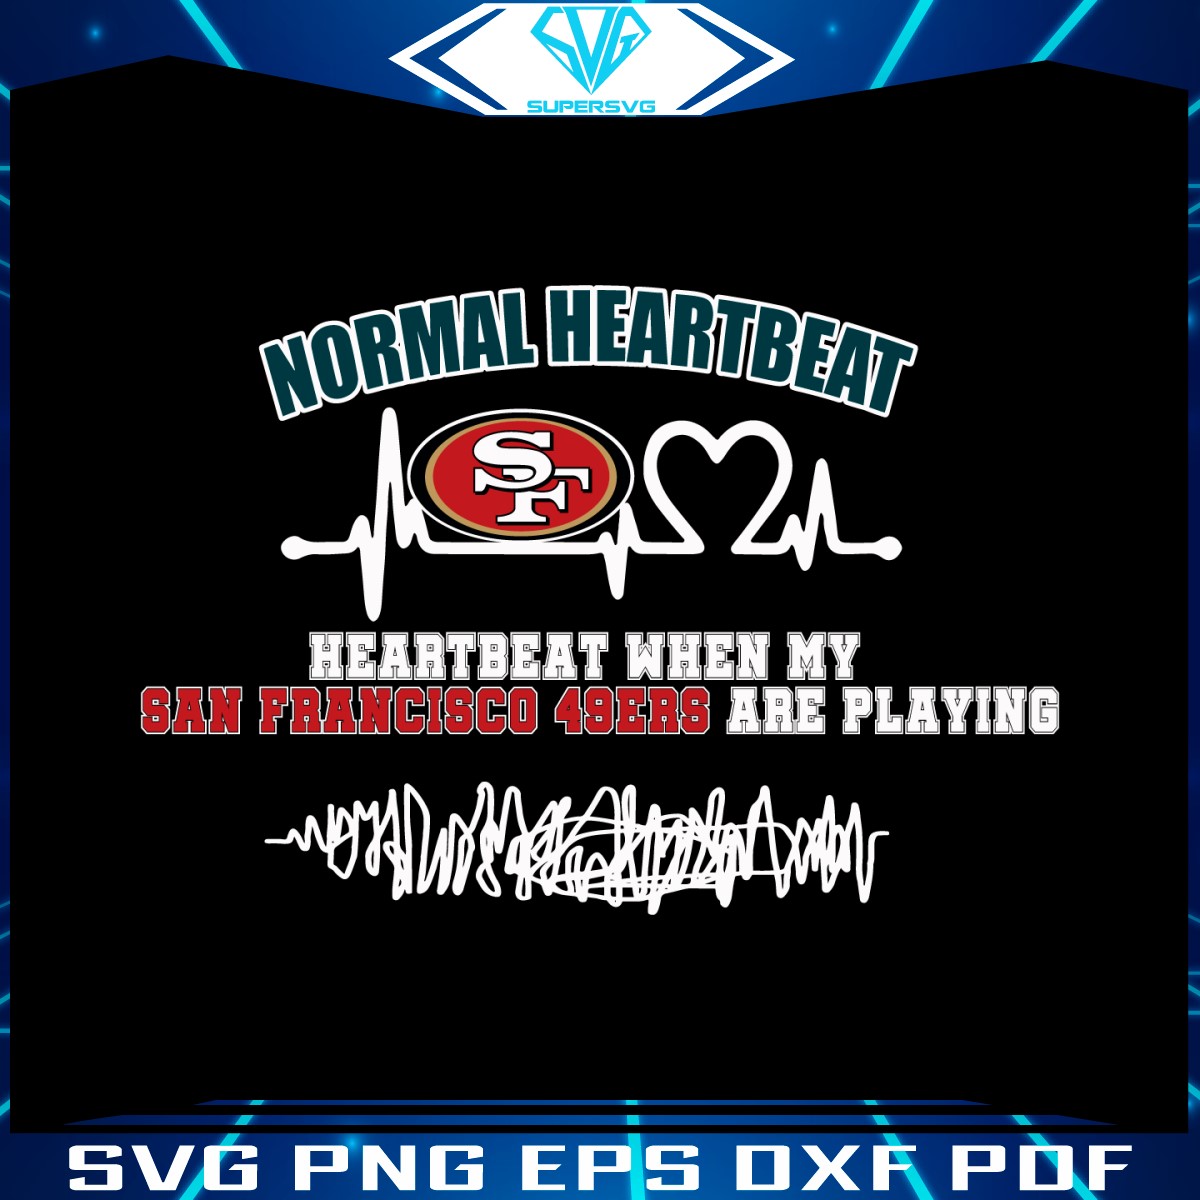 heartbeat-when-my-san-francisco-49ers-are-playing-svg